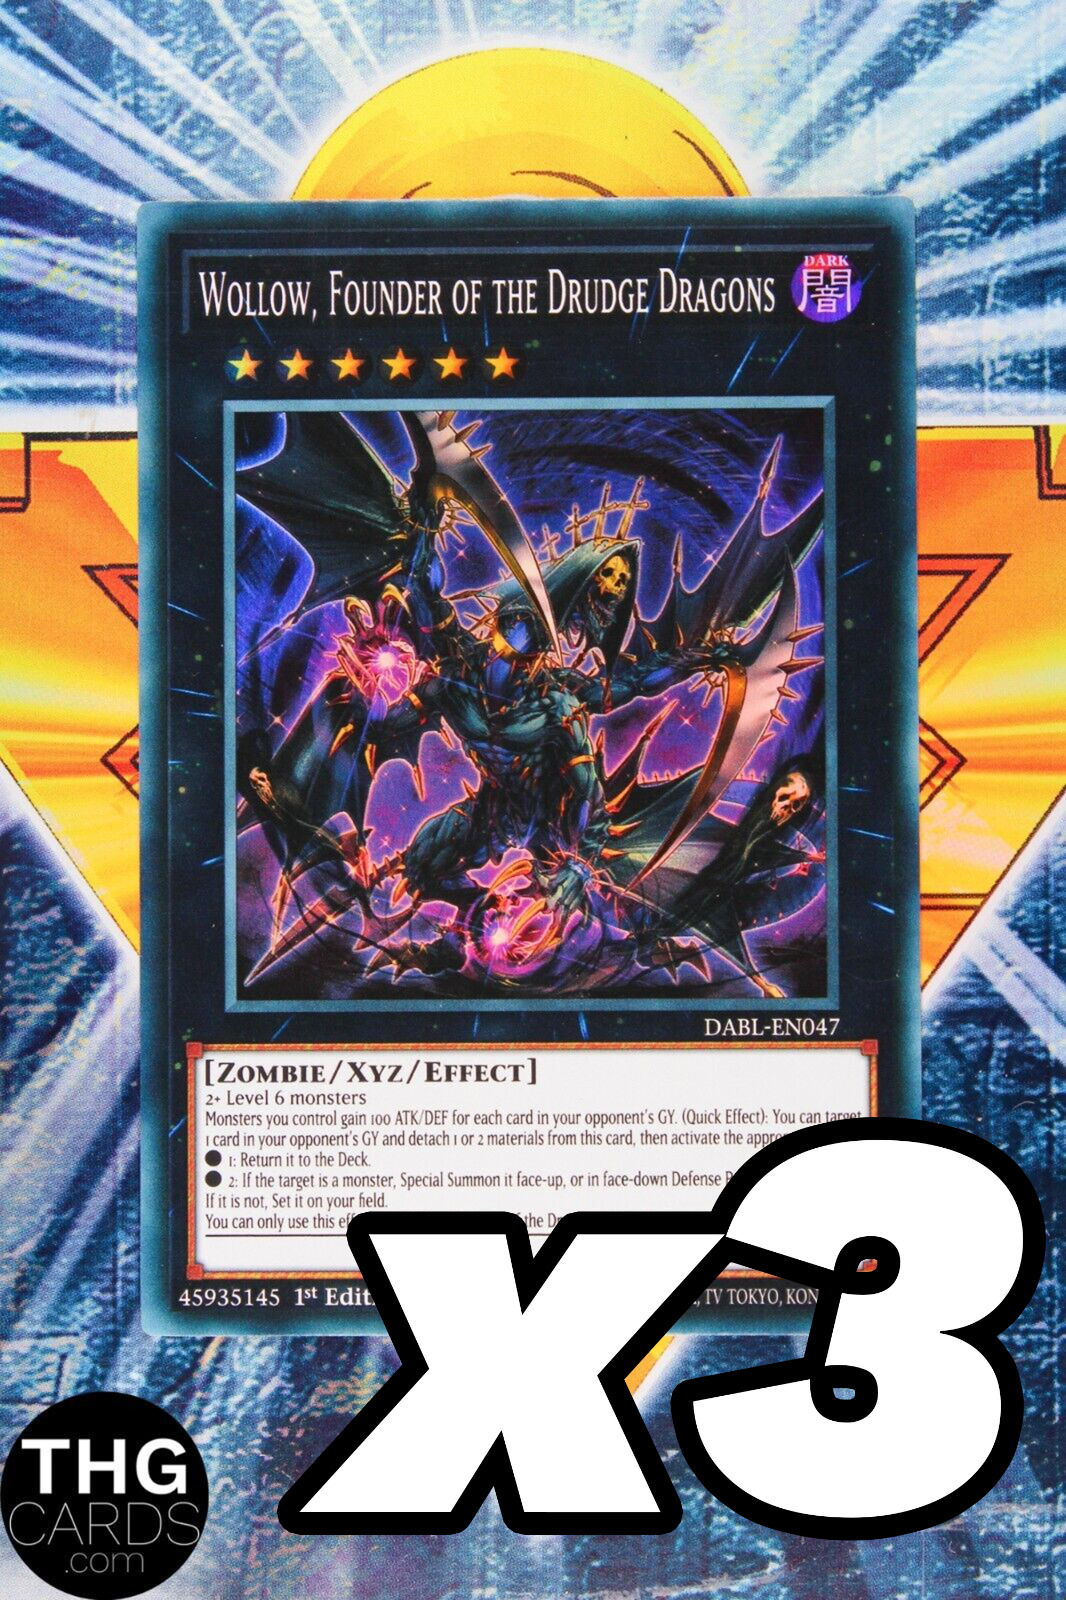 Wollow, Founder of the Drudge Dragons DABL-EN047 Super Rare Yugioh Card Playset